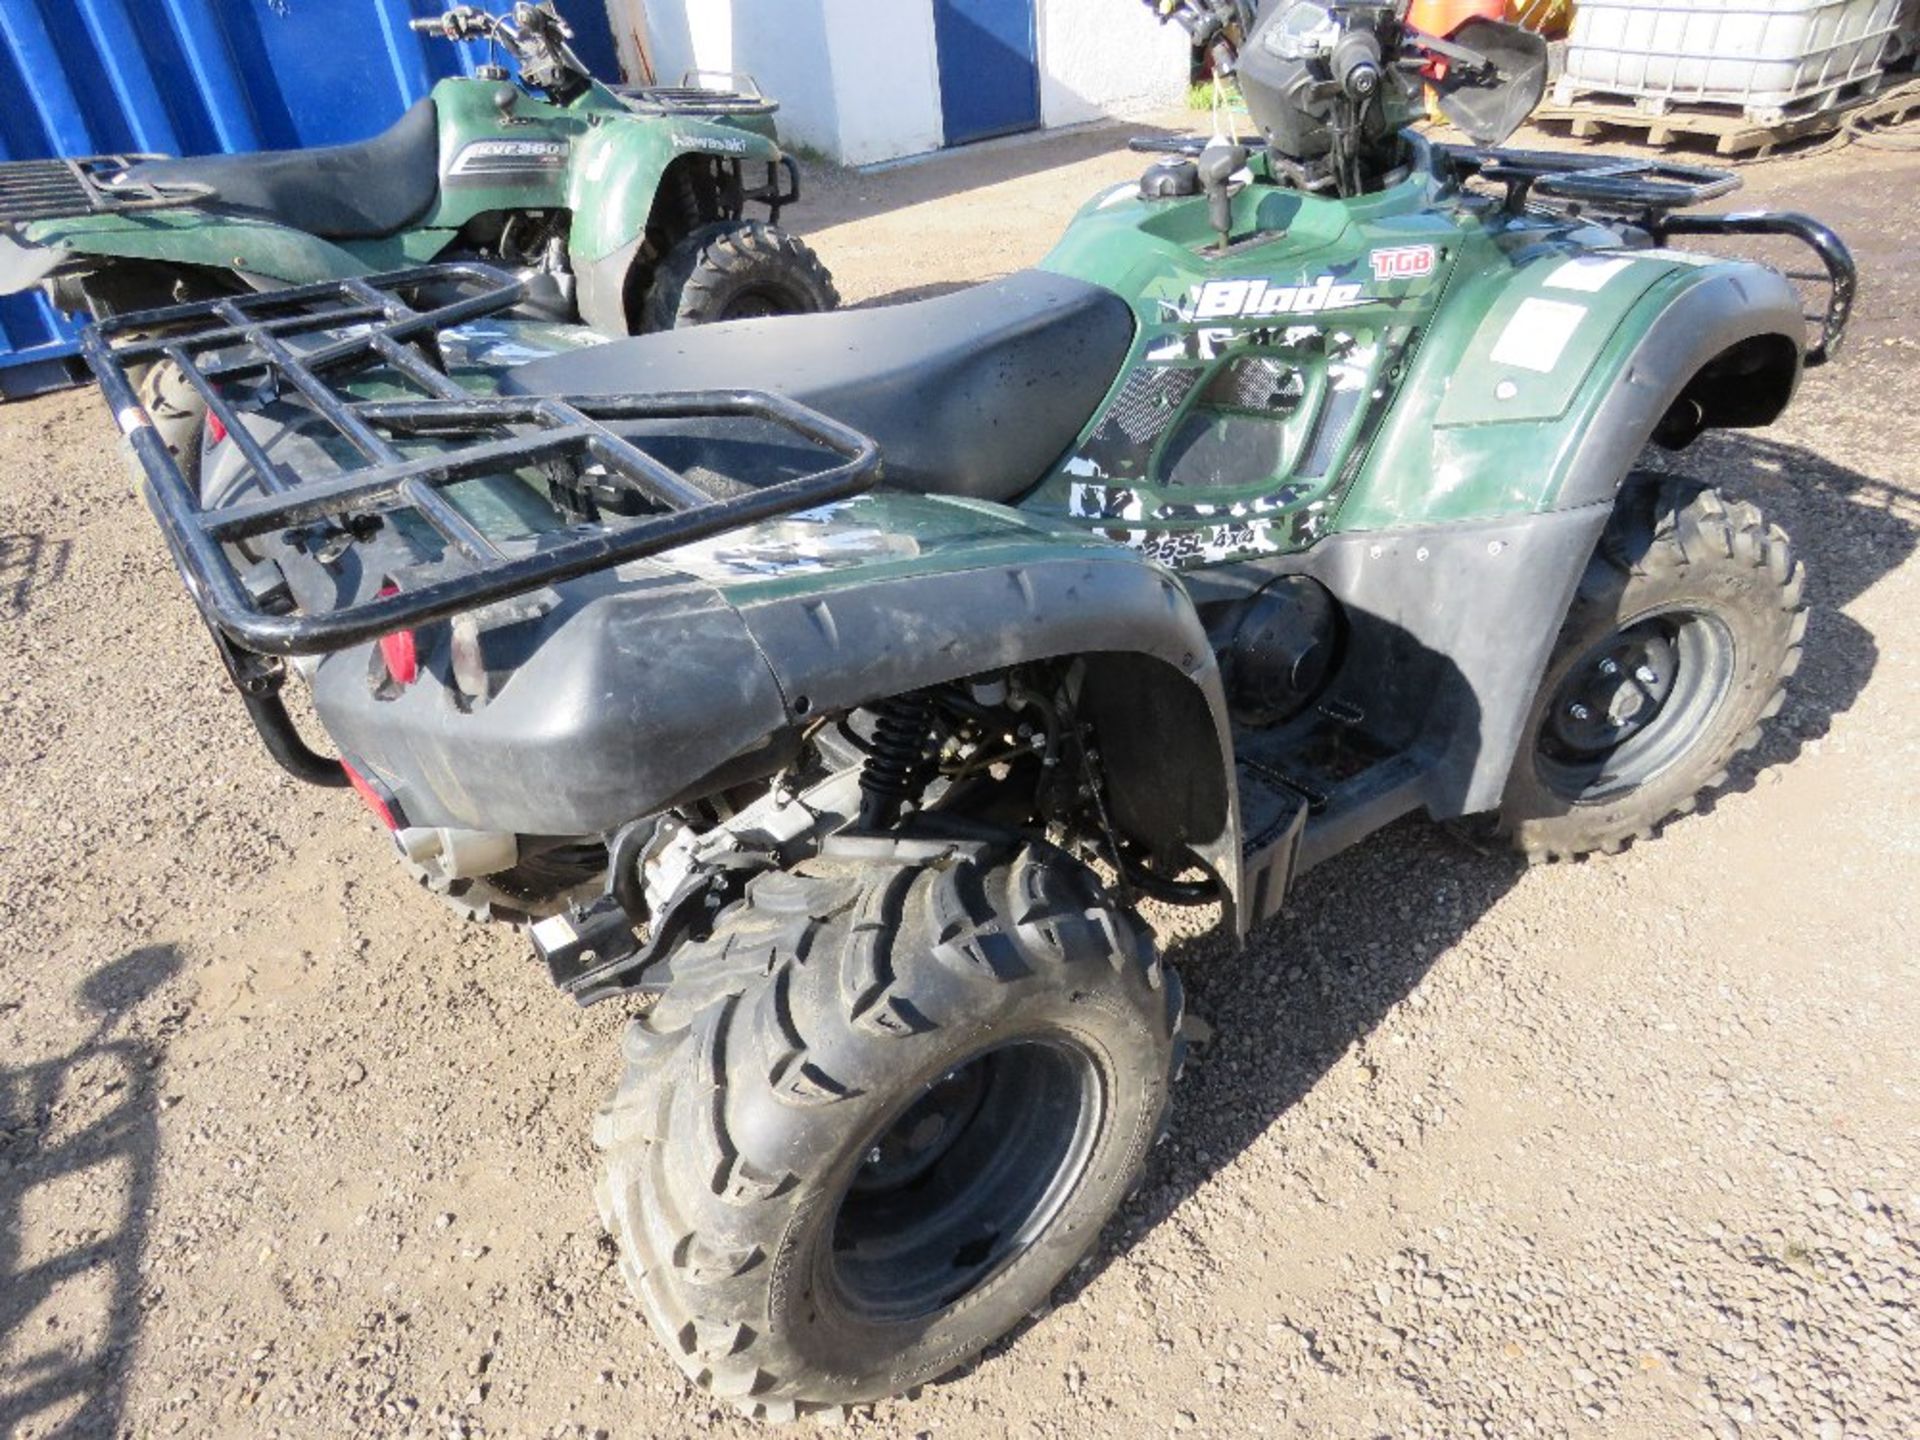 TGB BLADE 425 / QUADZILLA 4WD QUAD BIKE, YEAR 2017 DECLARED NEW. 664REC KMS APPROX. WHEN TESTED WAS - Image 3 of 8